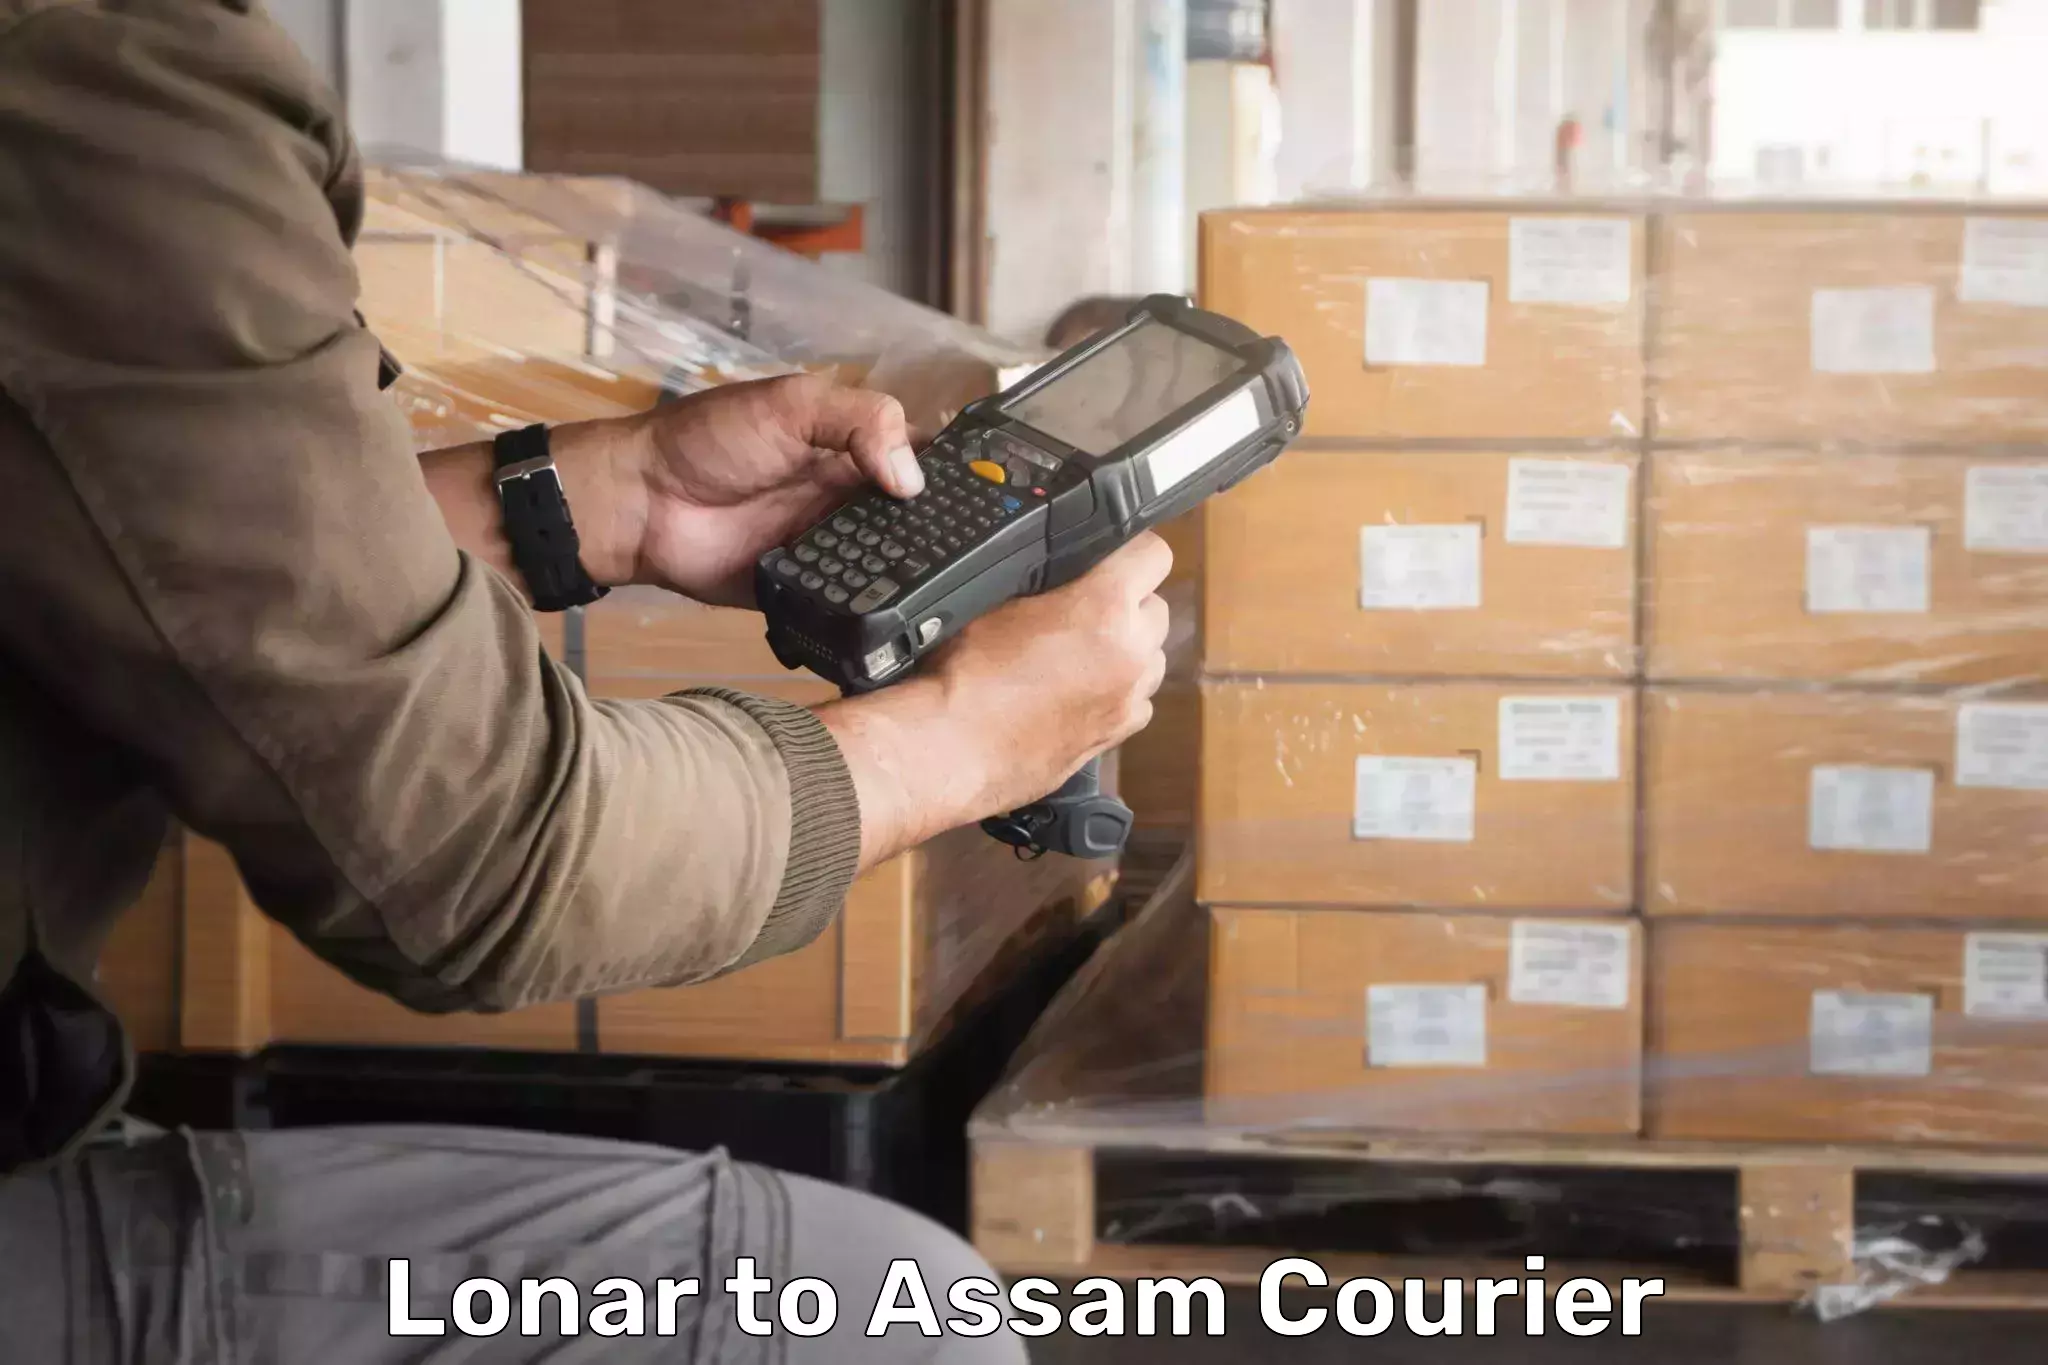 Global courier networks Lonar to Mariani